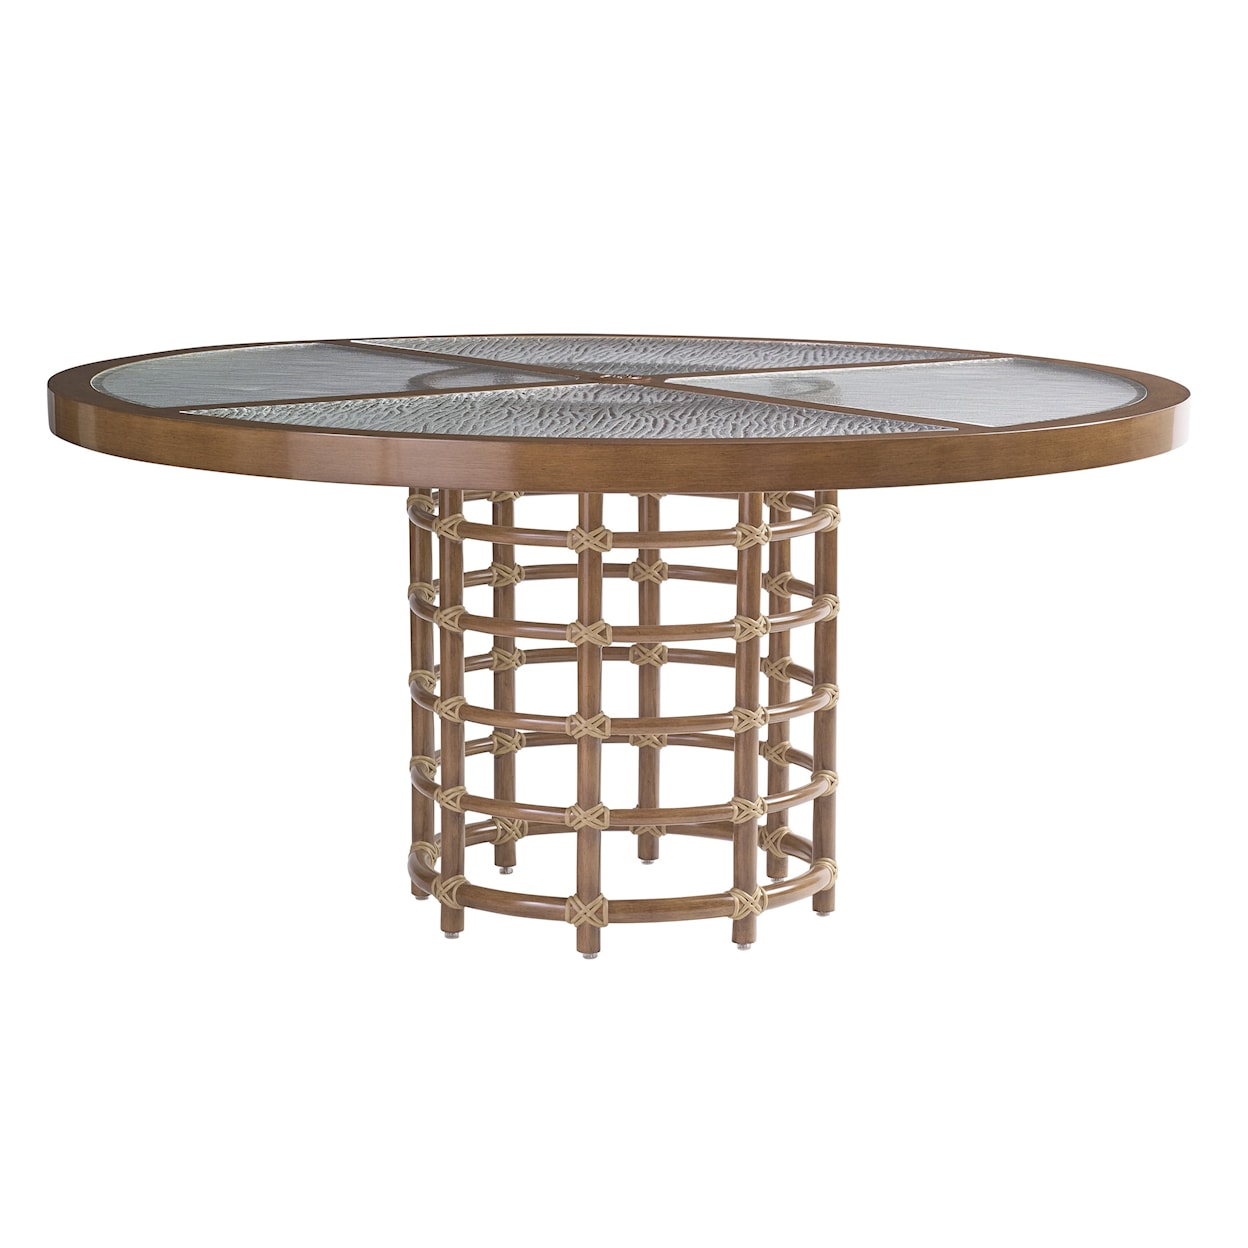 Tommy Bahama Outdoor Living Sandpiper Bay Outdoor Round Dining Table